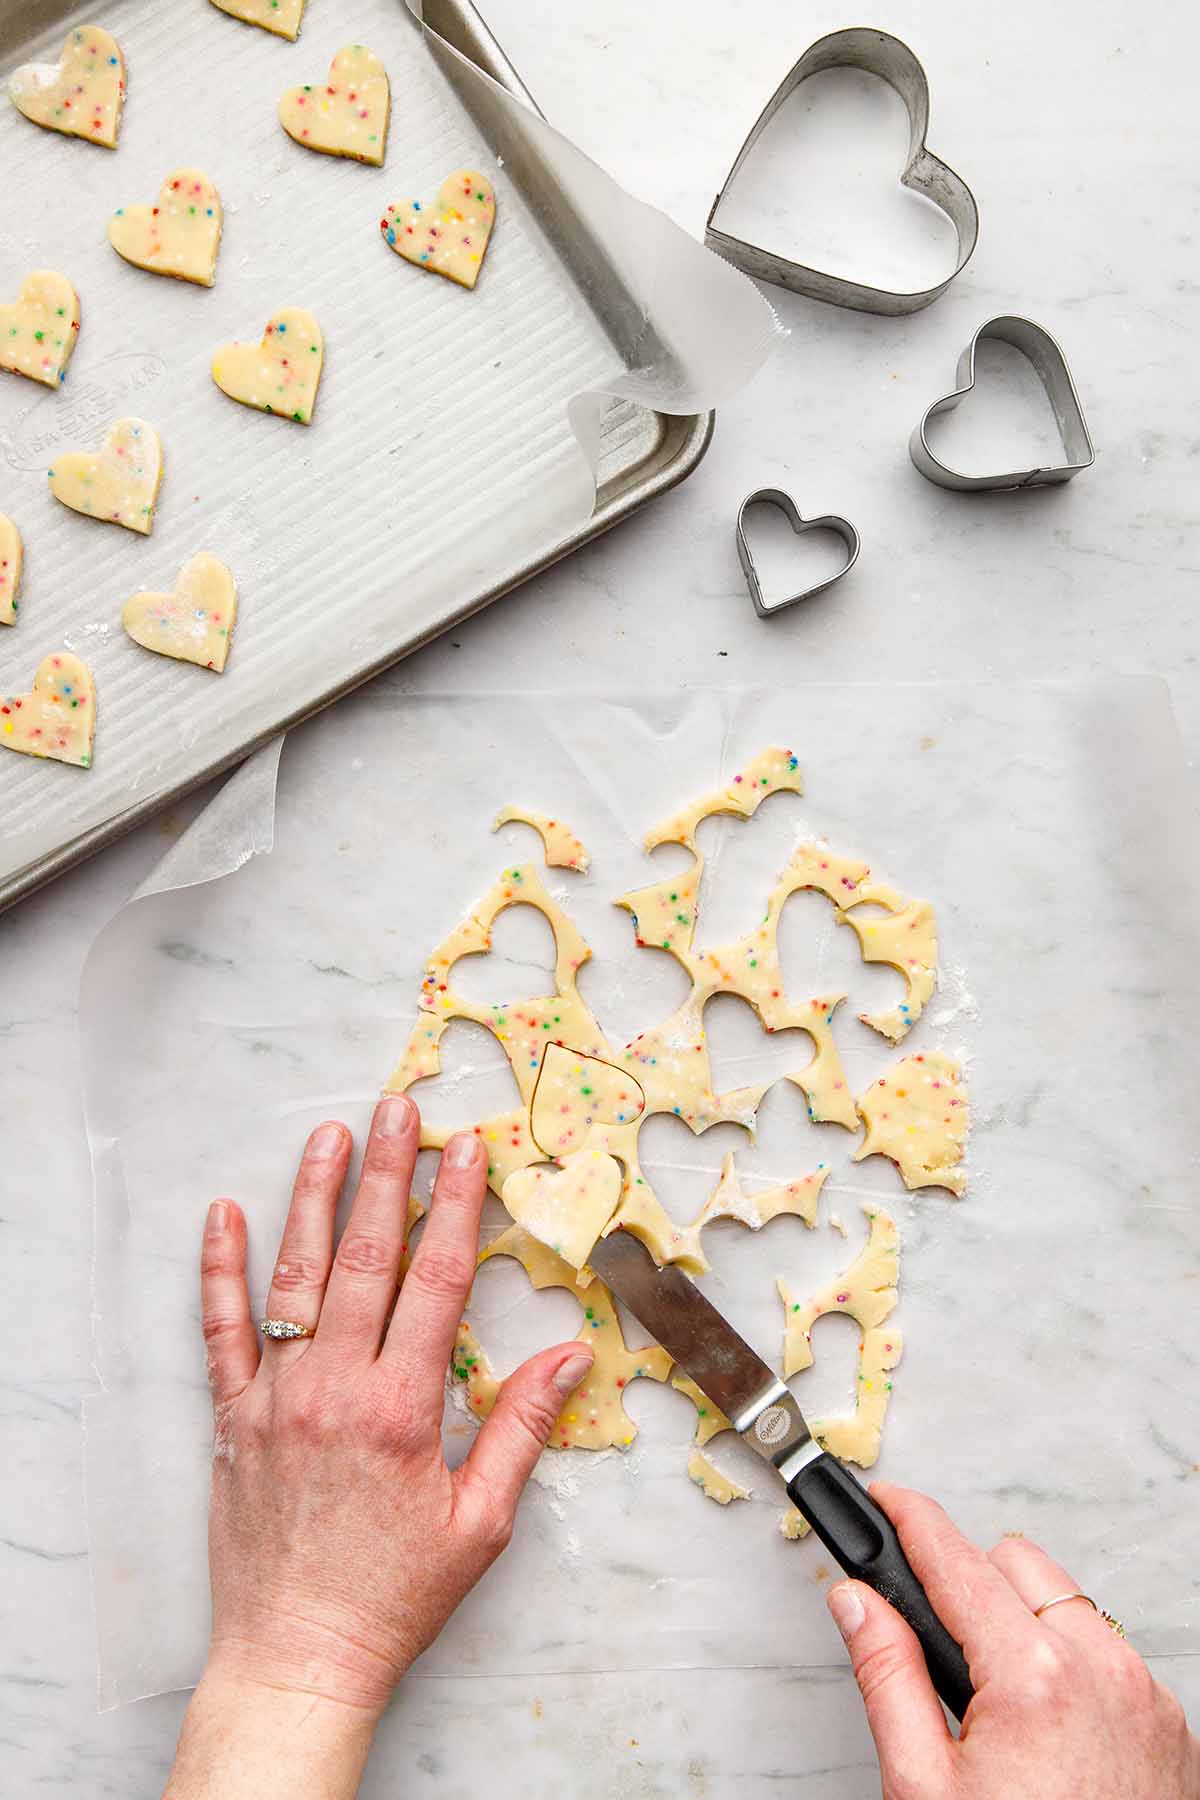 Hands lifting cookie cutouts with an offset spatula to place them on a small baking sheet.